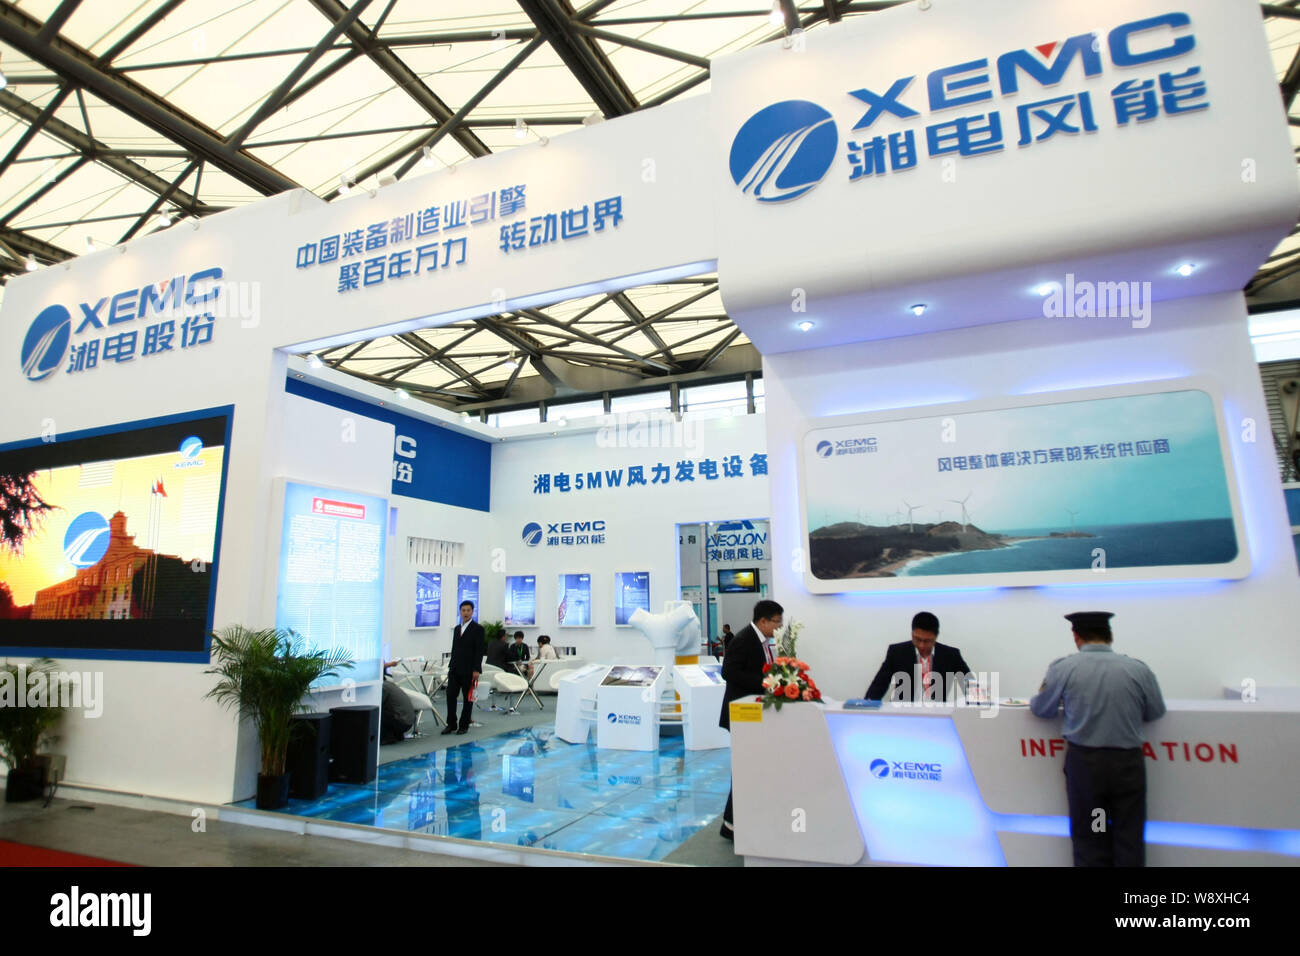 --FILE--People visit the stand of XEMC (Xiangtan Electric Manufacturing Group Co., Ltd.) at an exhibition in Shanghai, China, 26 April 2012.   Austral Stock Photo